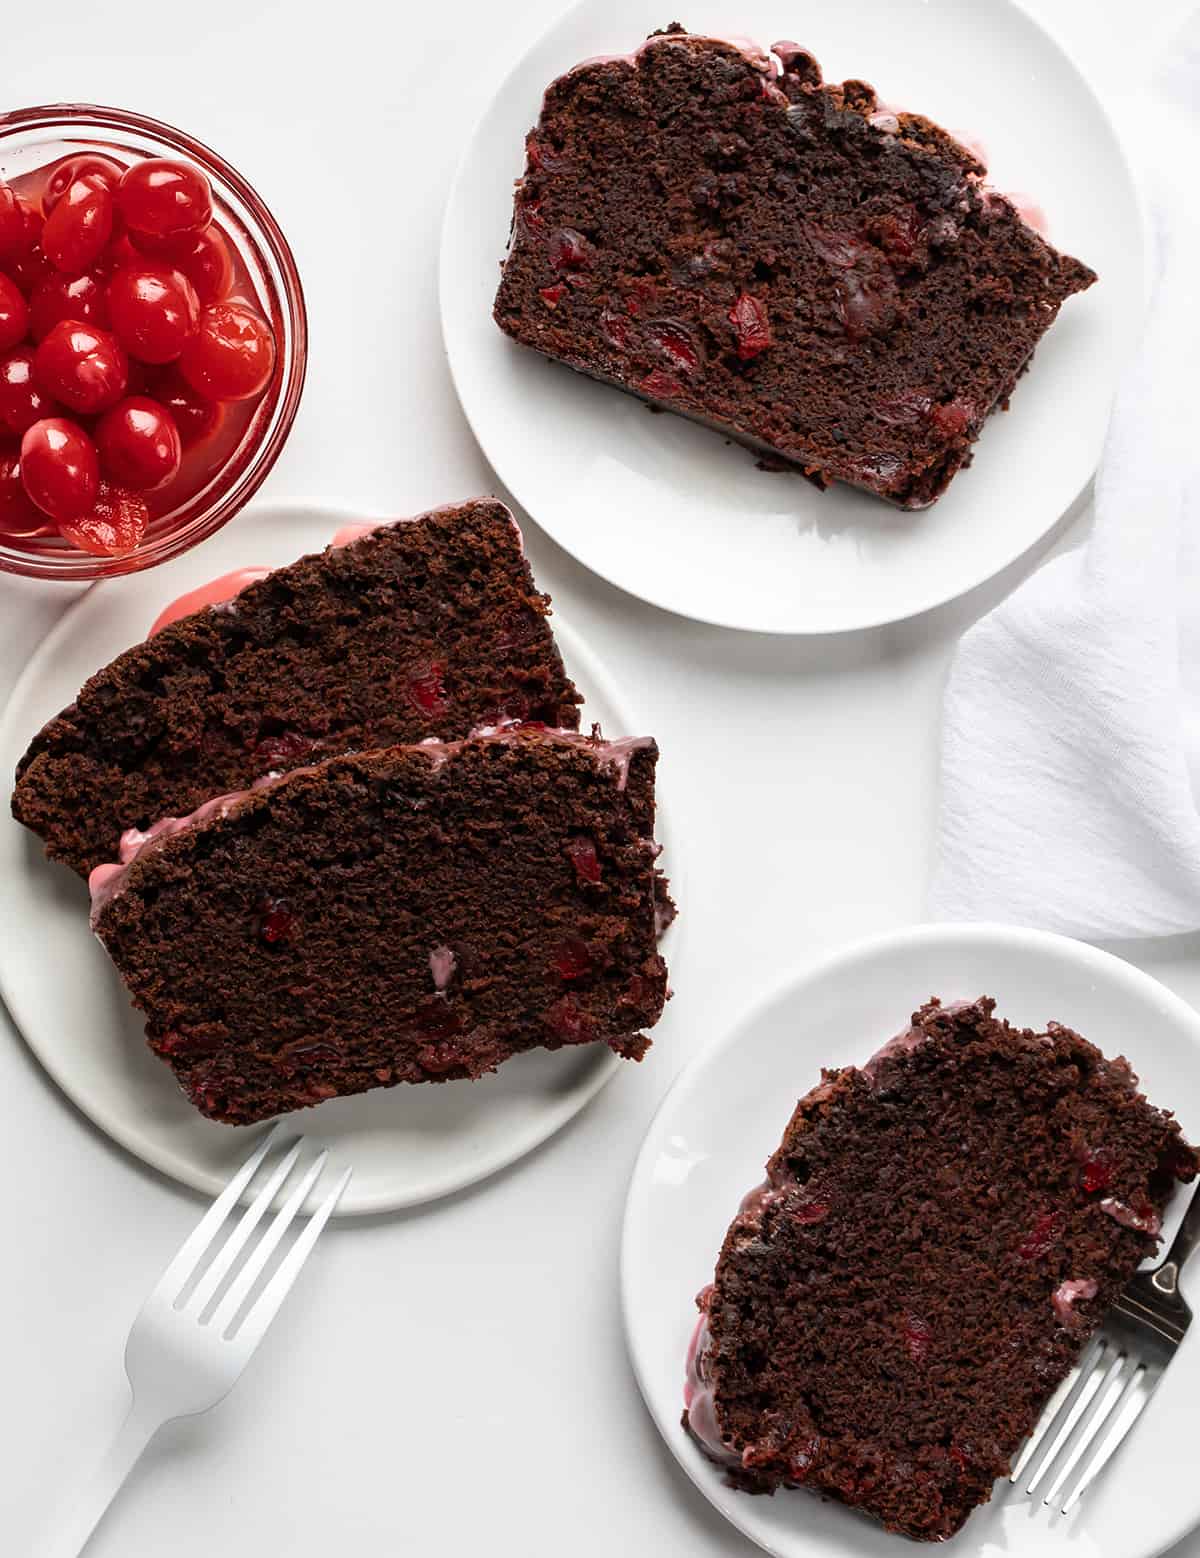 Slices of Cherry Brownie Bread on Plates on a White Counter with a Small Bowl of Cherries.